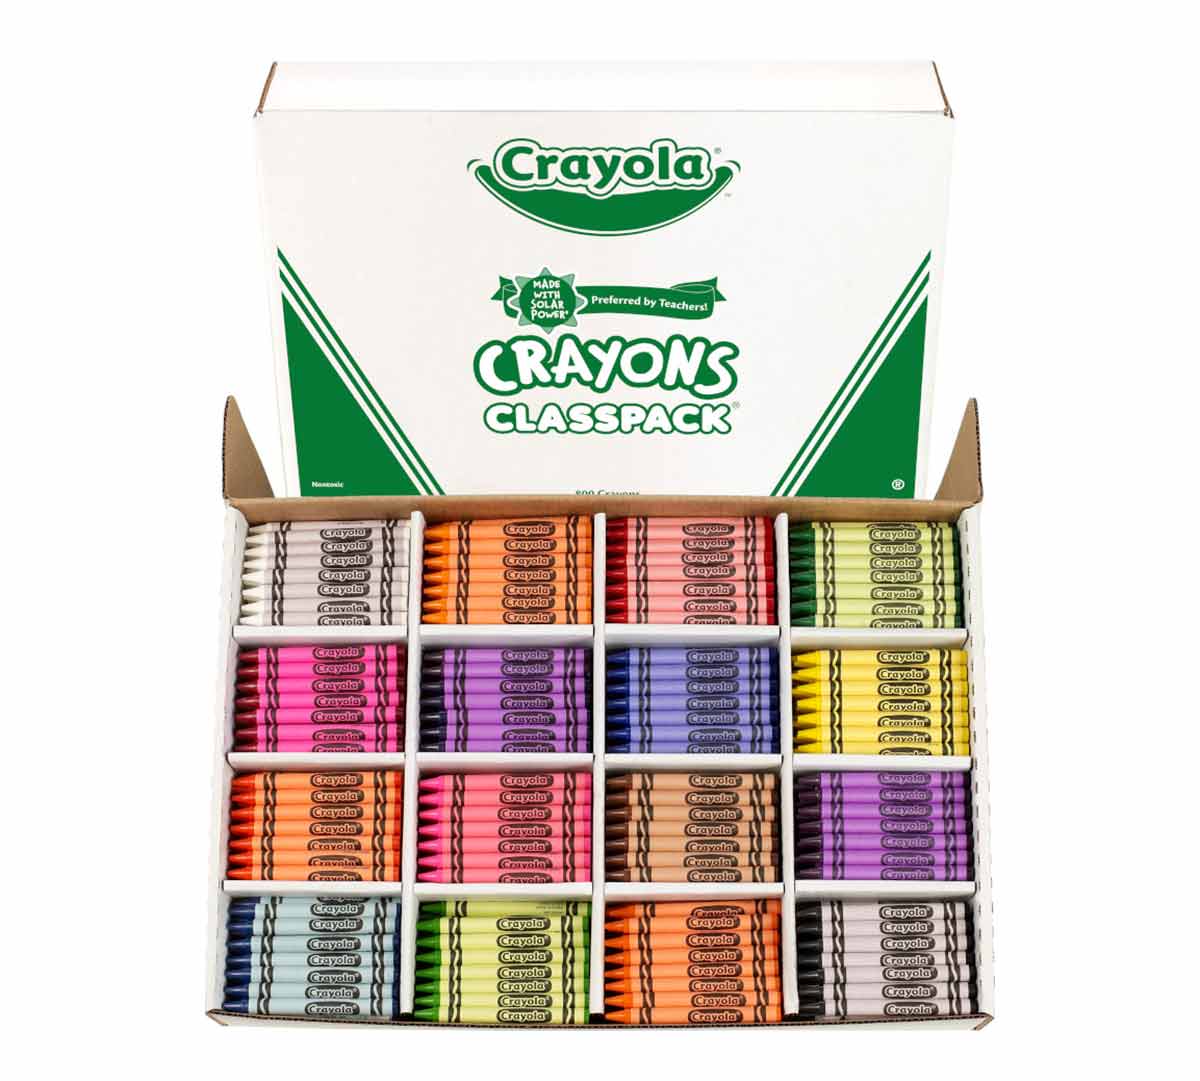 https://shop.crayola.com/on/demandware.static/-/Sites-crayola-storefront/default/dw36ff49bb/images/52-8016-0-804_Classpack_Sustainability_800ct-Crayons_50-Sets-16-Colors_H1.jpg